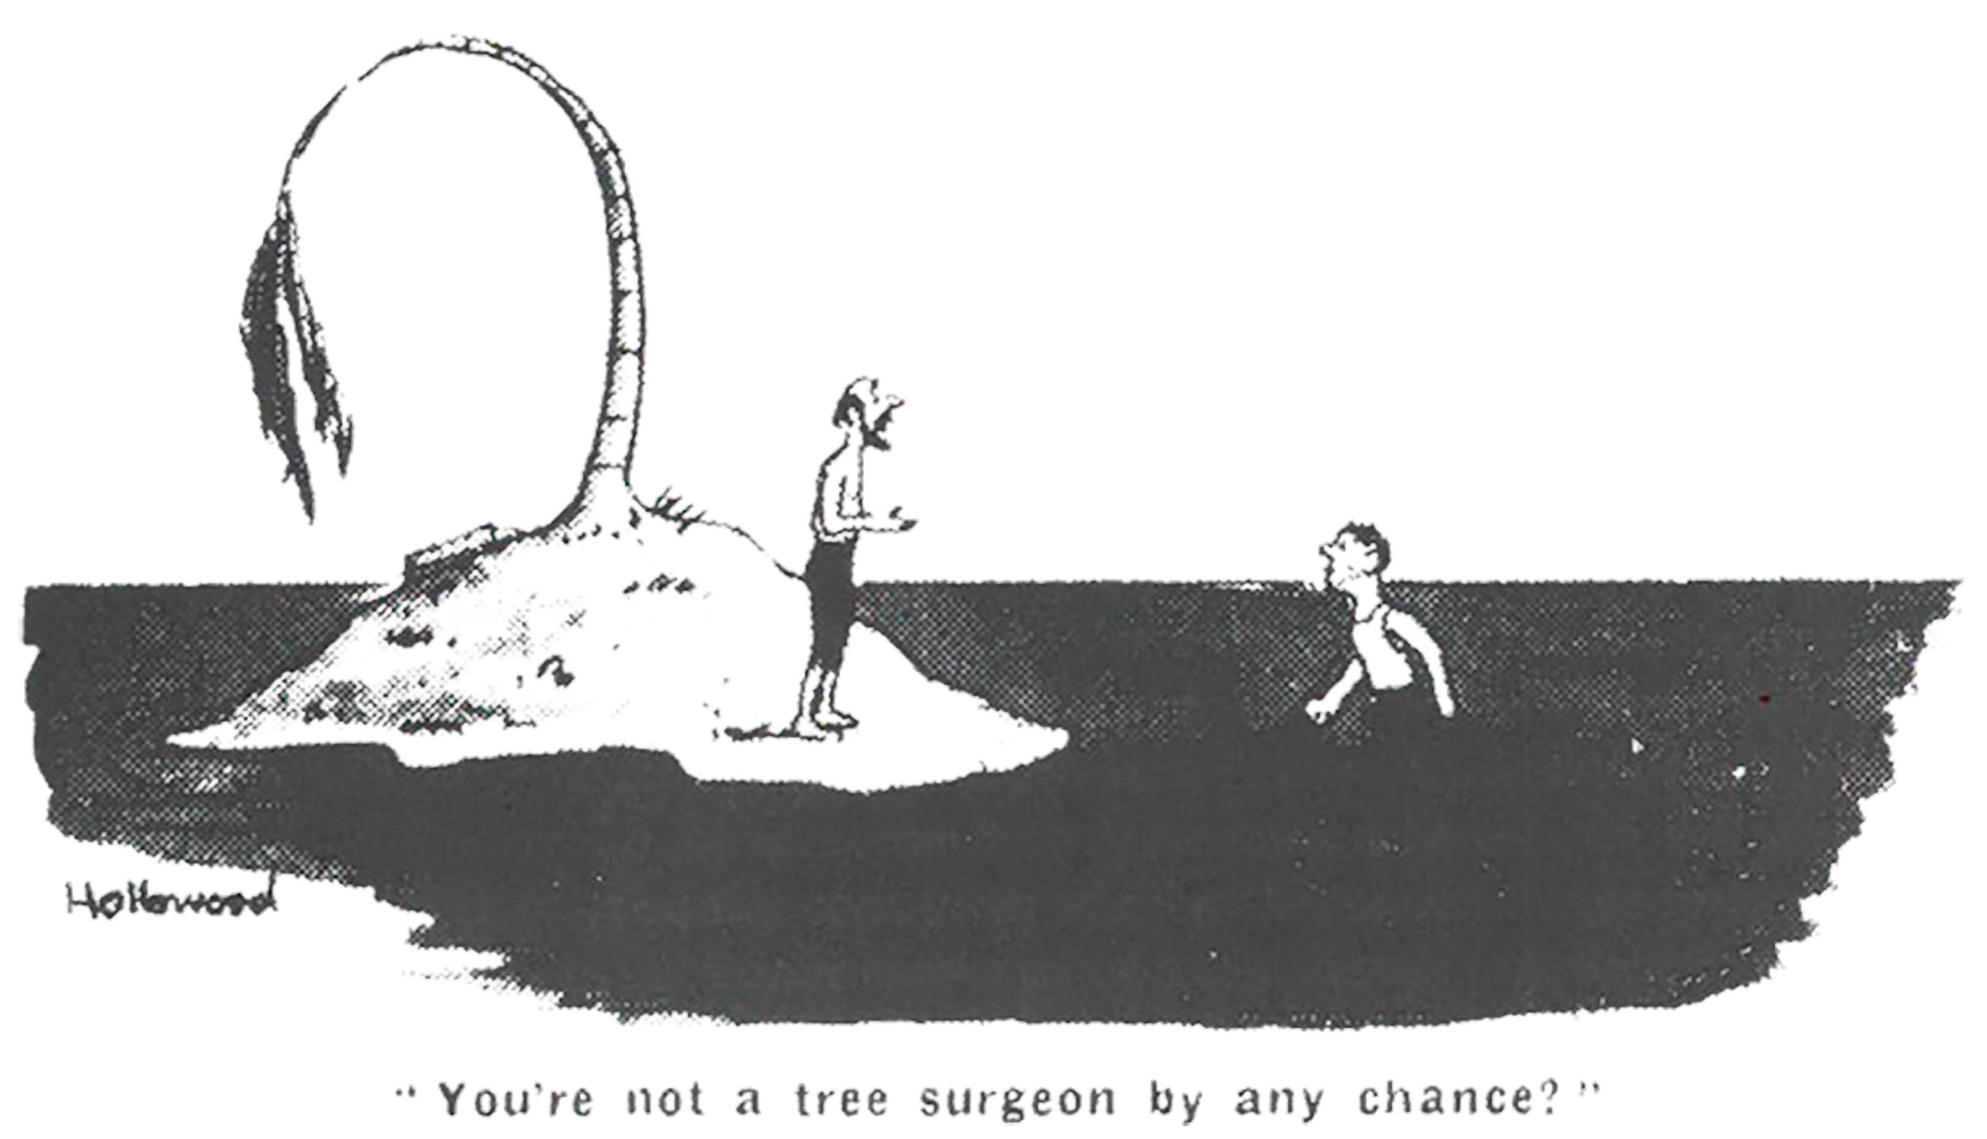 A cartoon from a 1972 edition of the Arboricultural Association News